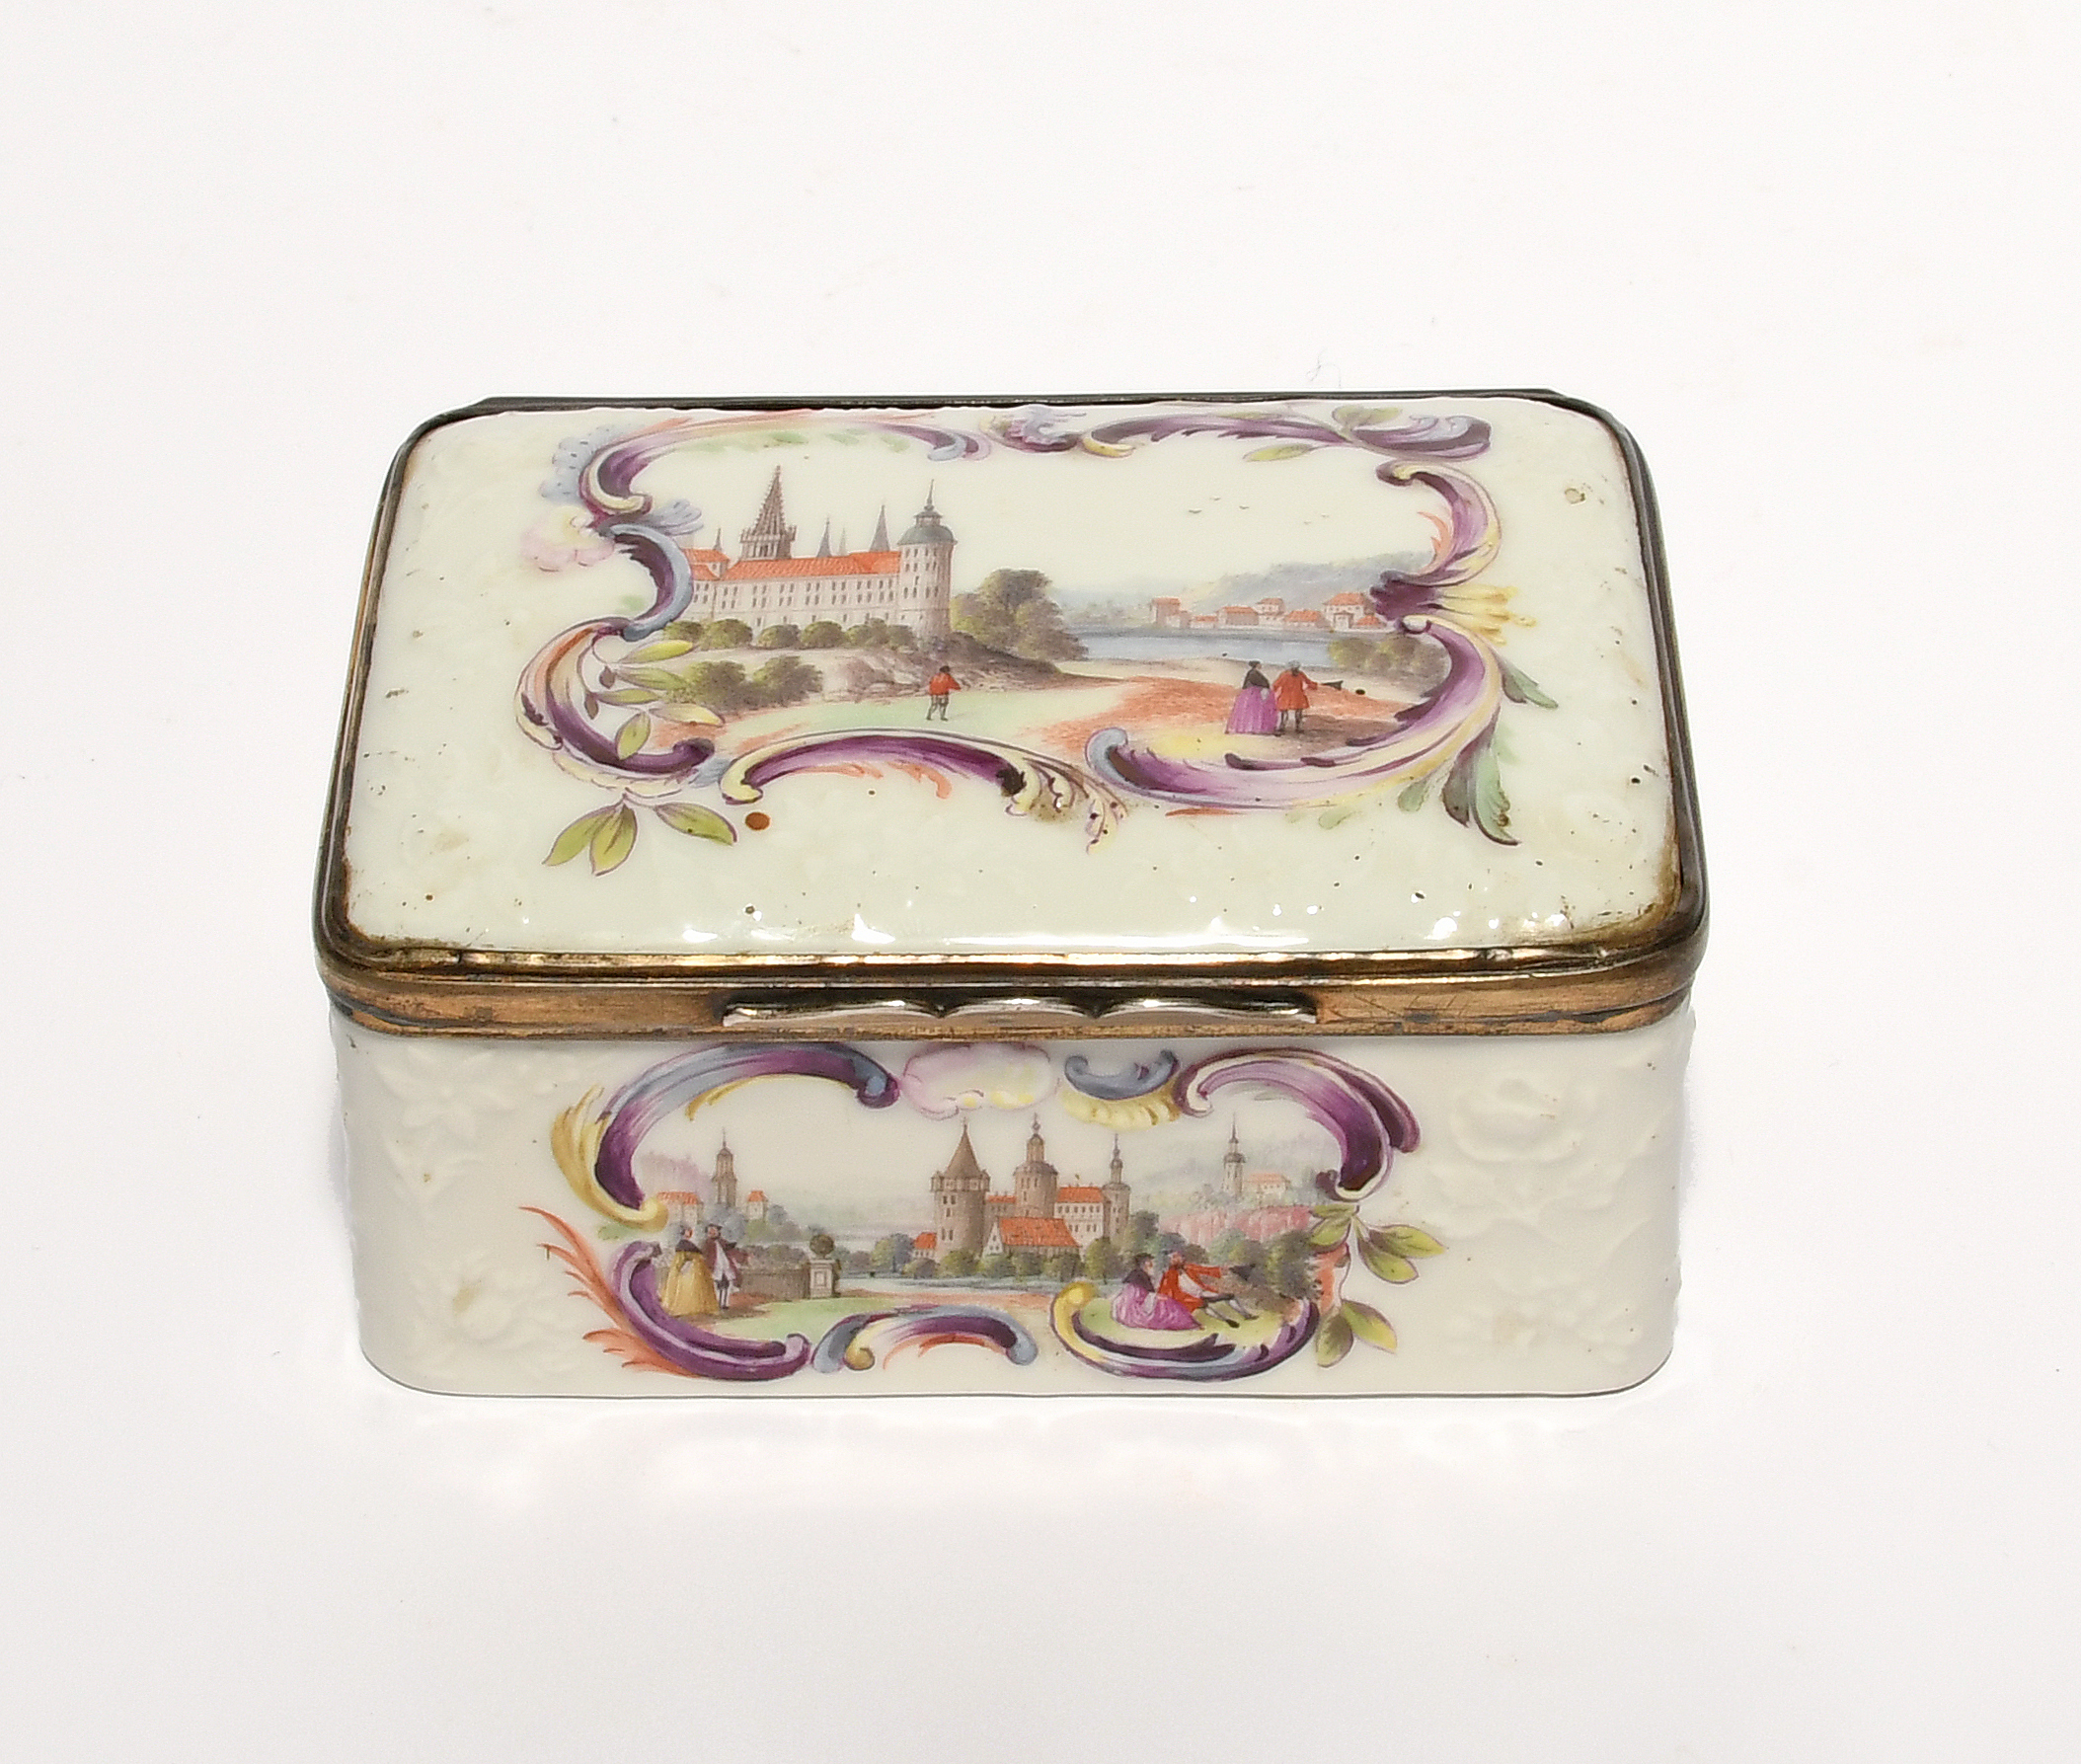 A good Meissen silver-gilt mounted box, mid 18th century, the exterior painted with vignettes of - Image 2 of 2